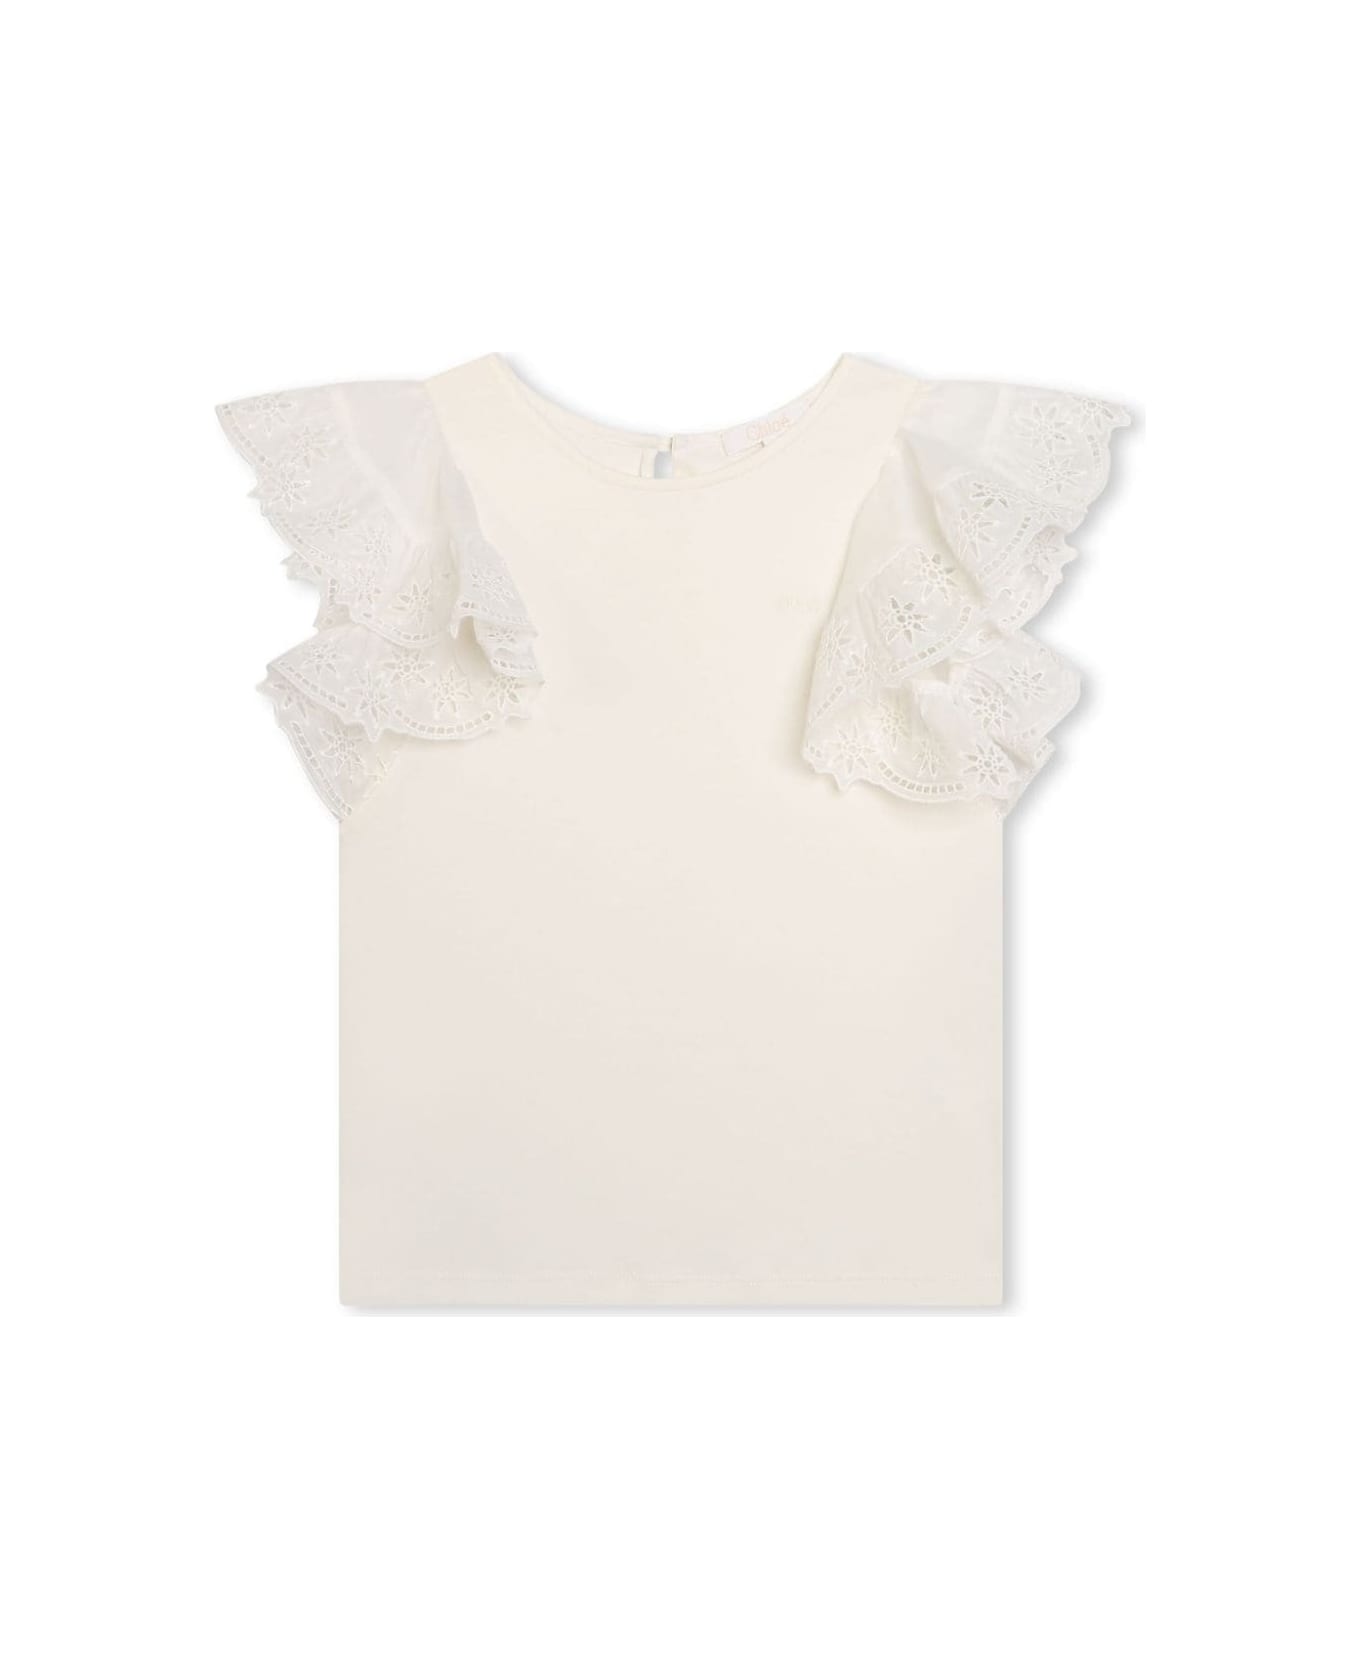 Chloé White Top With Embroidered Ruffles - Bianco トップス